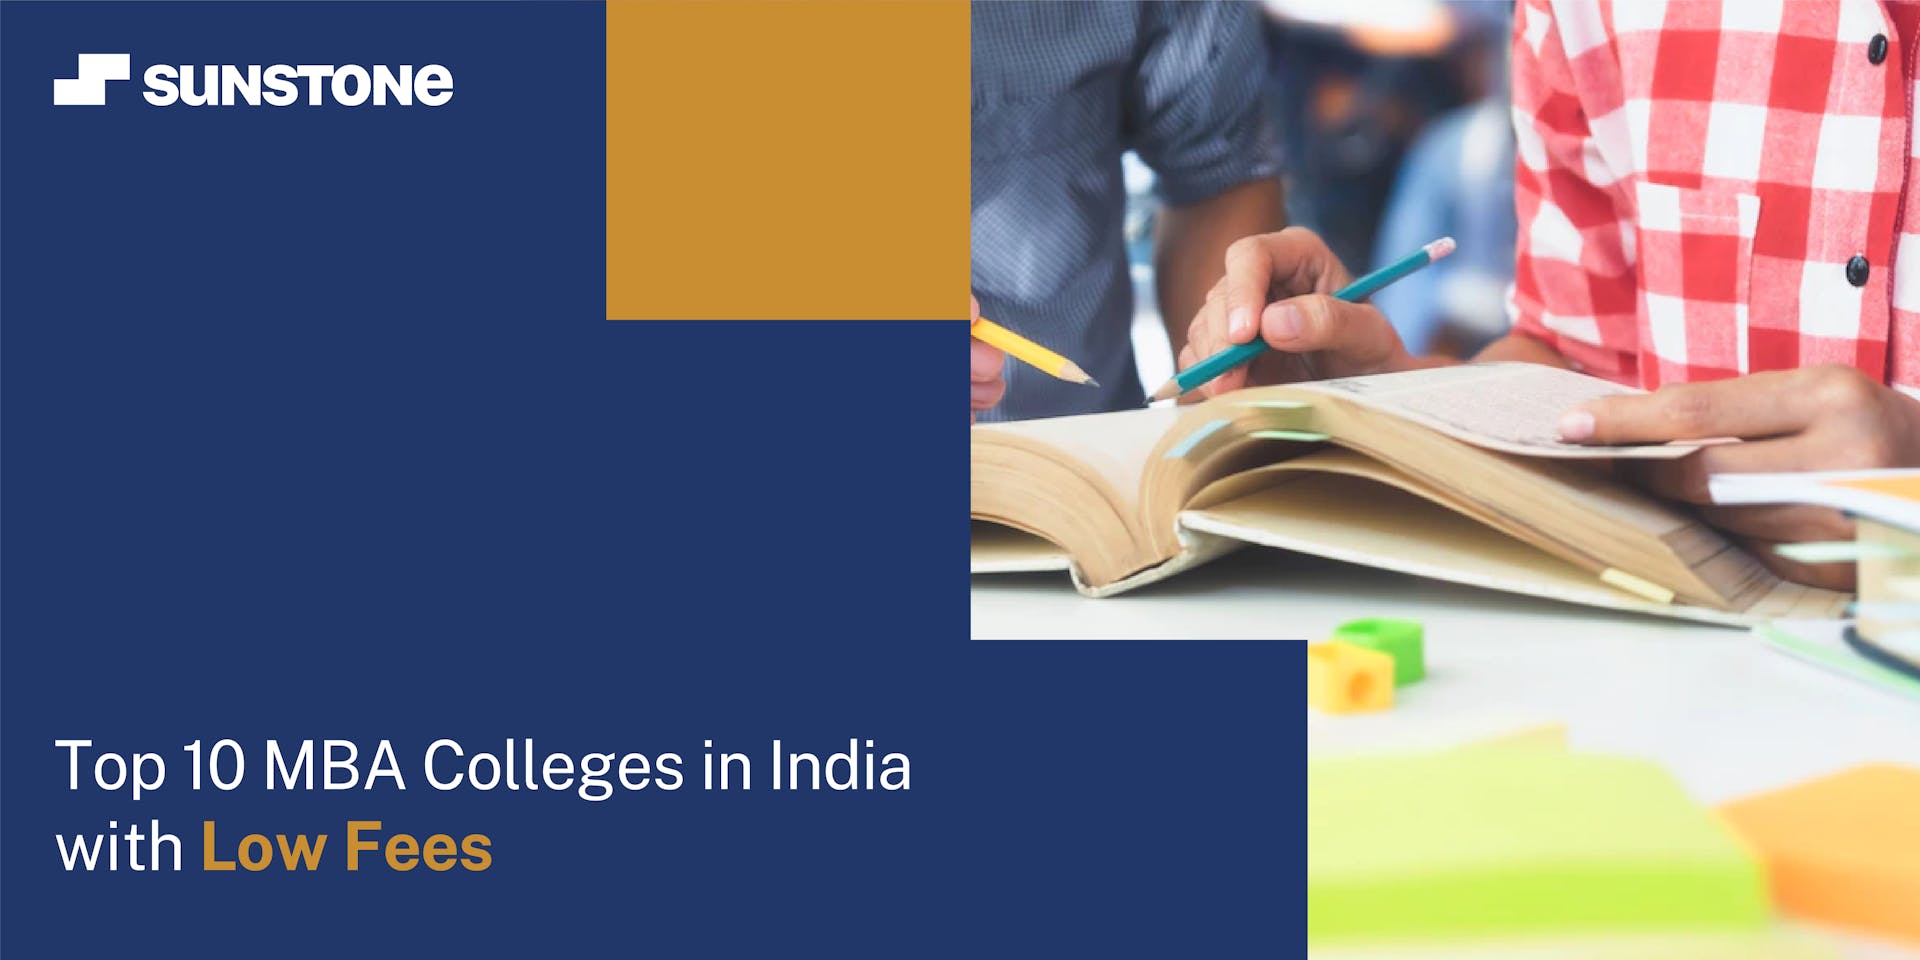 Top 10 MBA Colleges with Low Fees in India